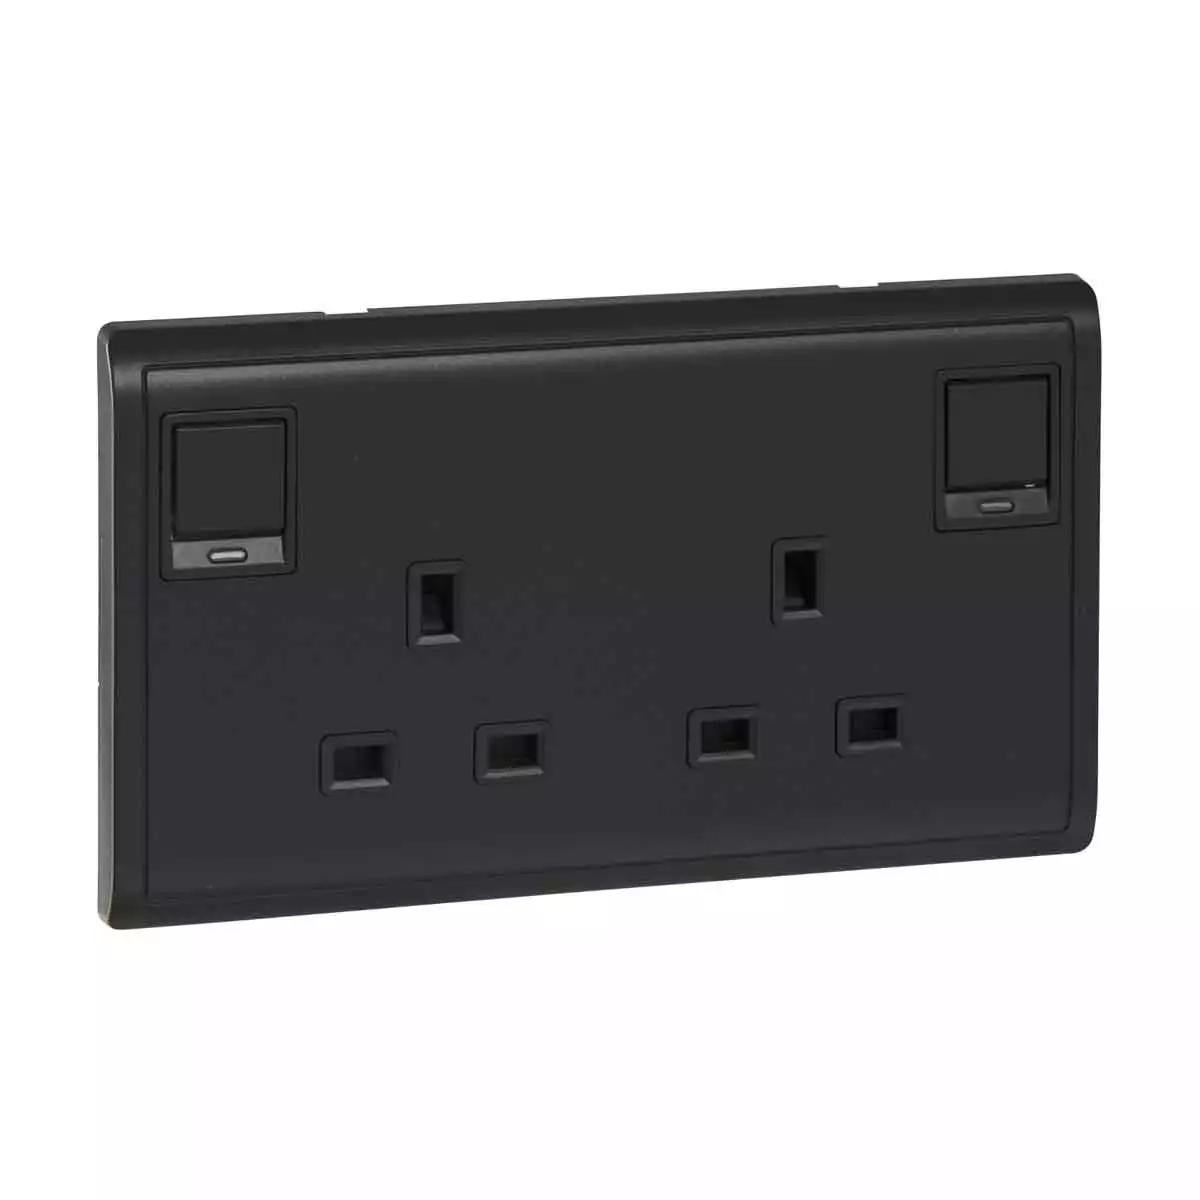 Pieno 13A 250V 2 Gang Switched Socket with Neon Matt Black